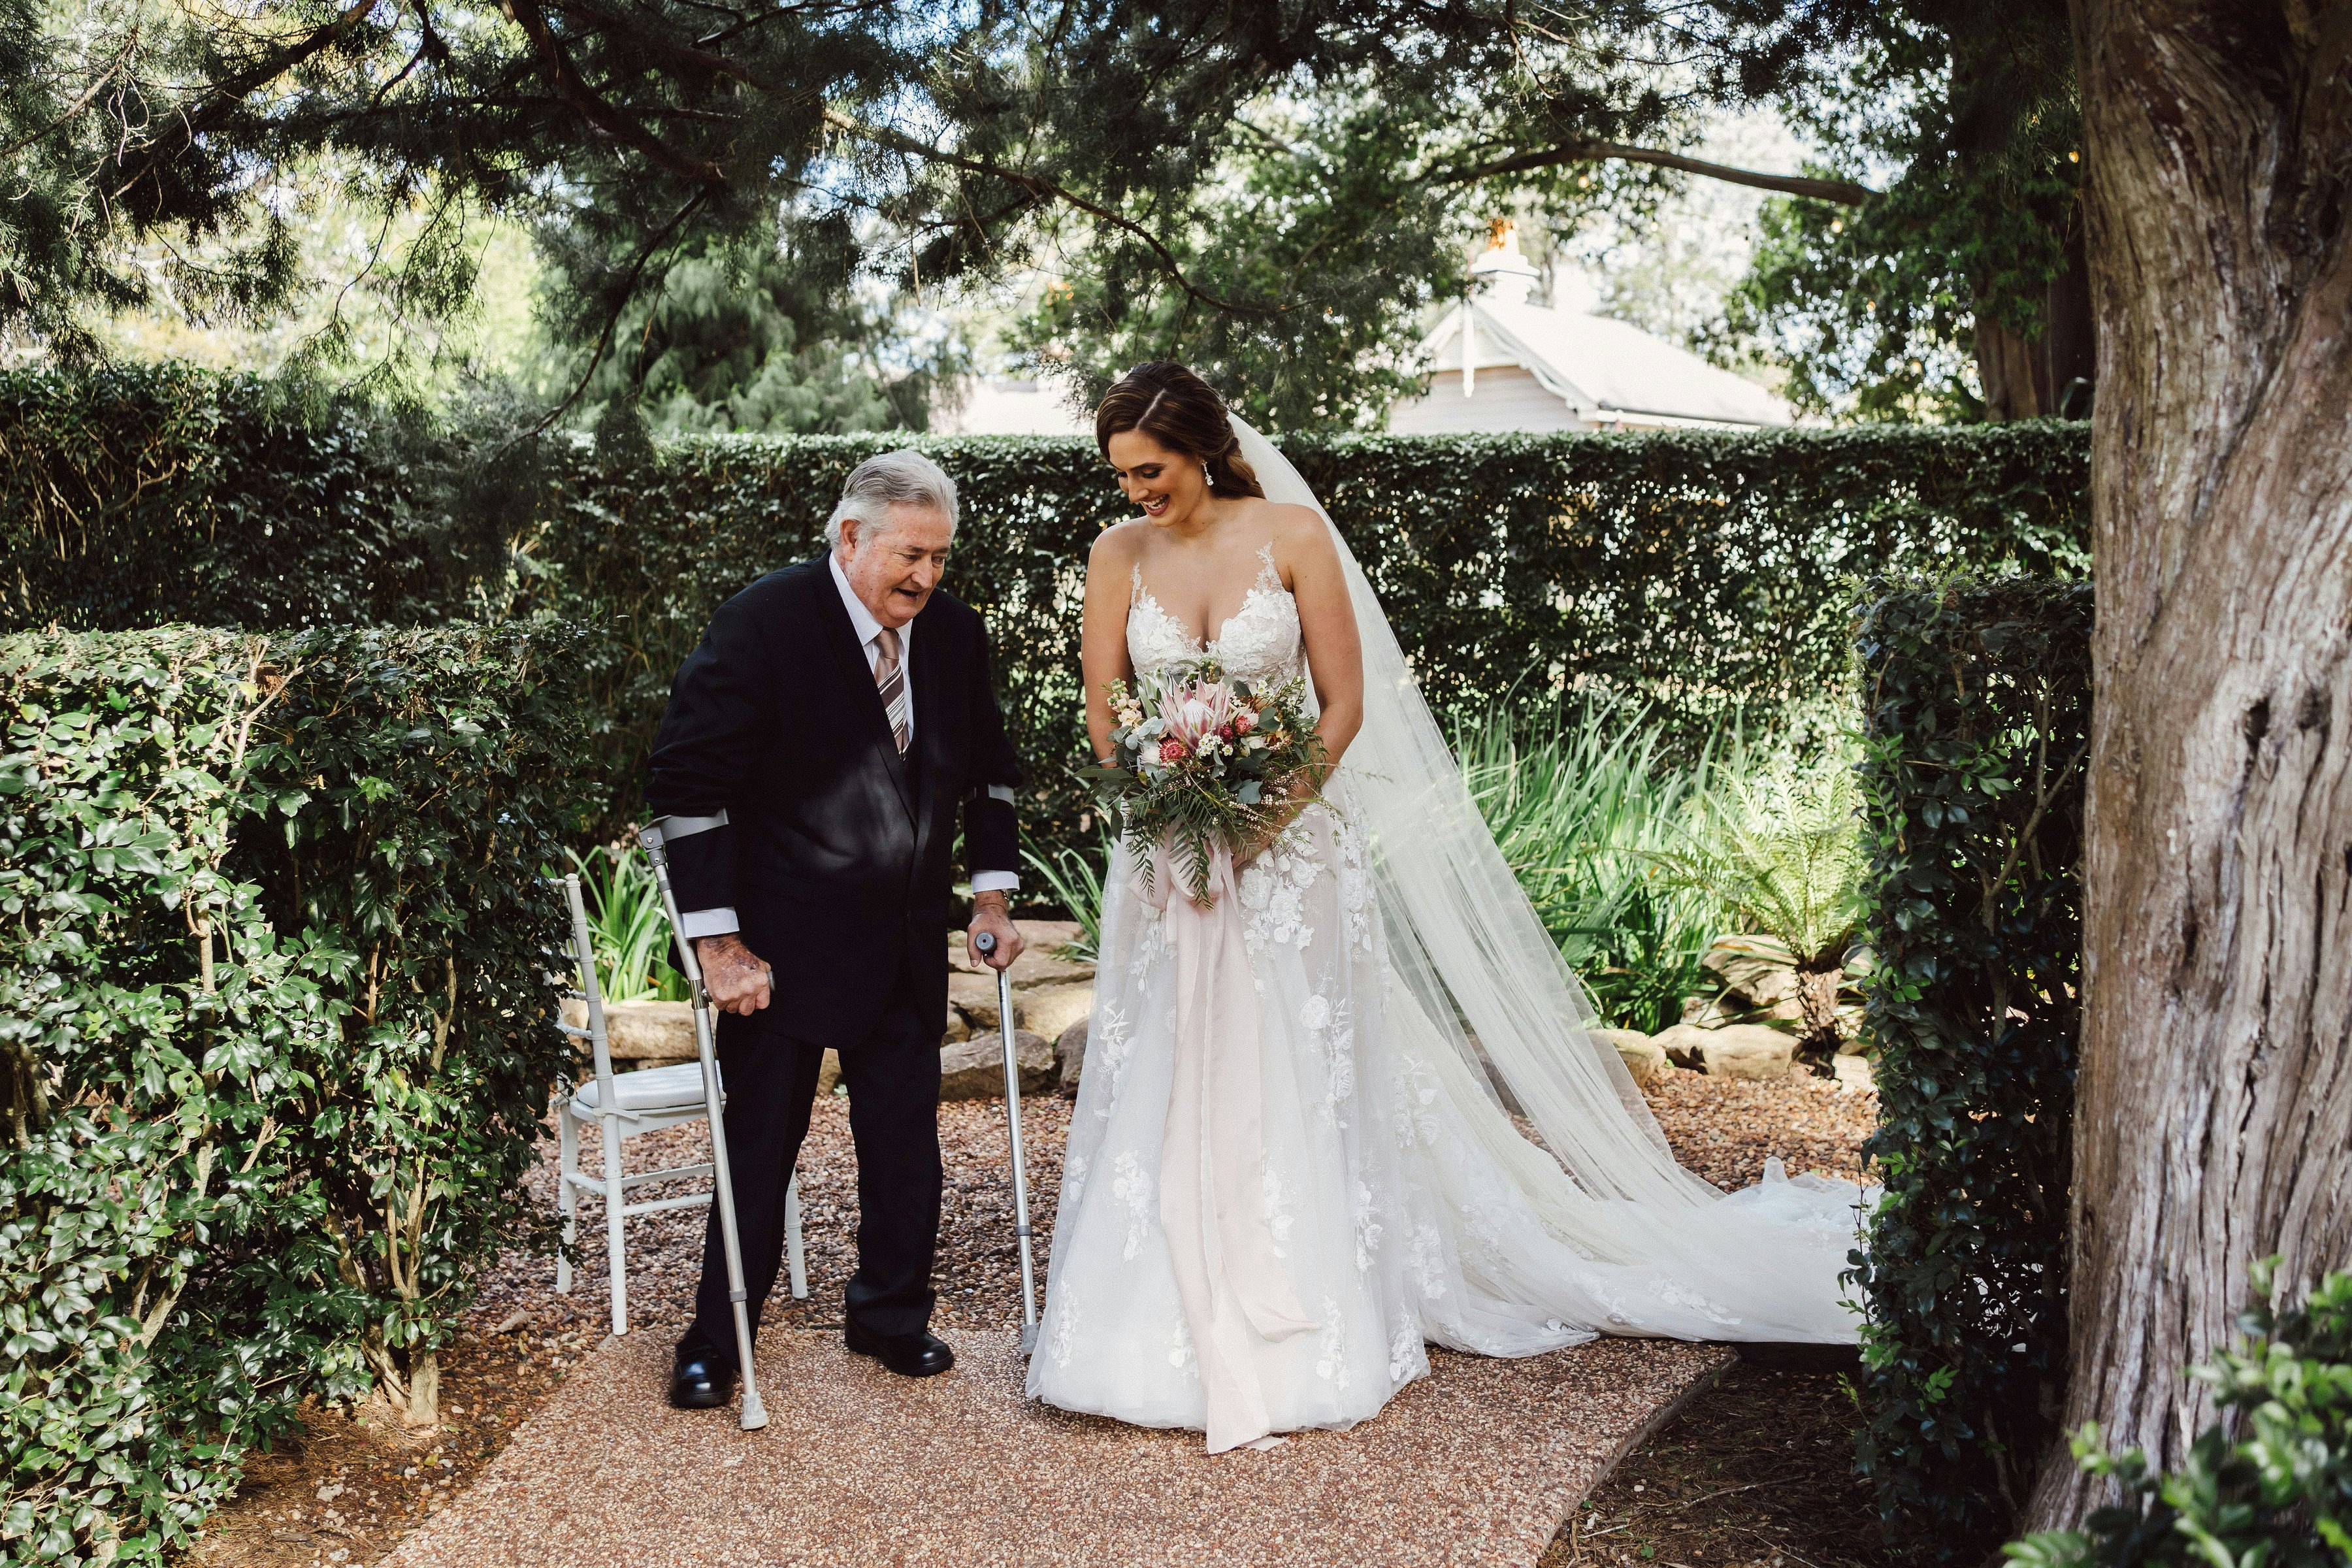 Bride meeting her father with crutches to walk down the aisle 